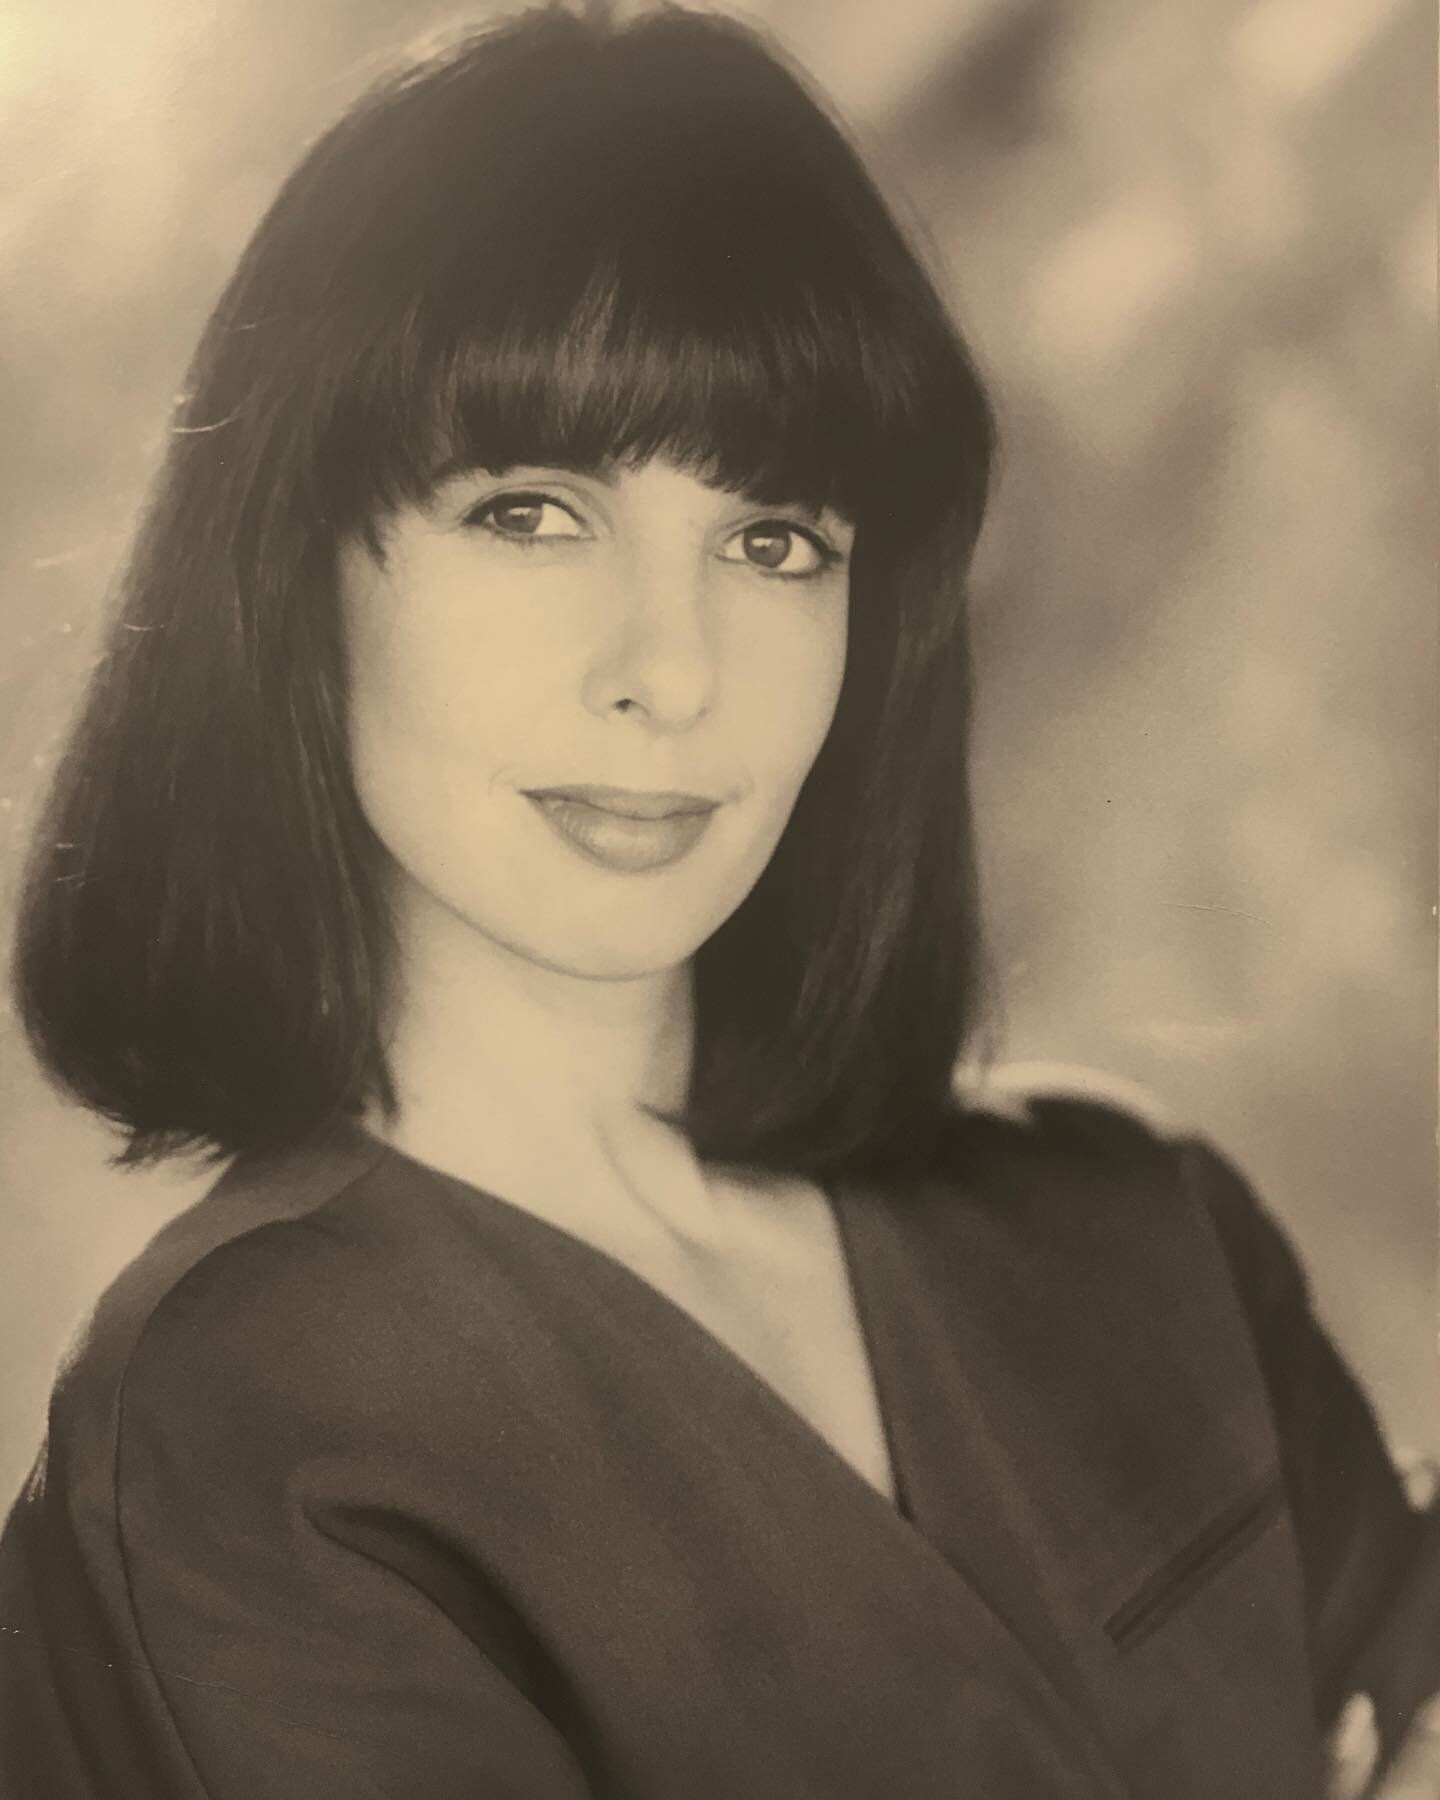 📸💫Circa 1992ish ~ Joining my acting buds in posting an old tool of the trade on old headshot day. May I be your public defender, please? B&amp;W FTW! &hellip;or in this case, faded sepia.😄💫